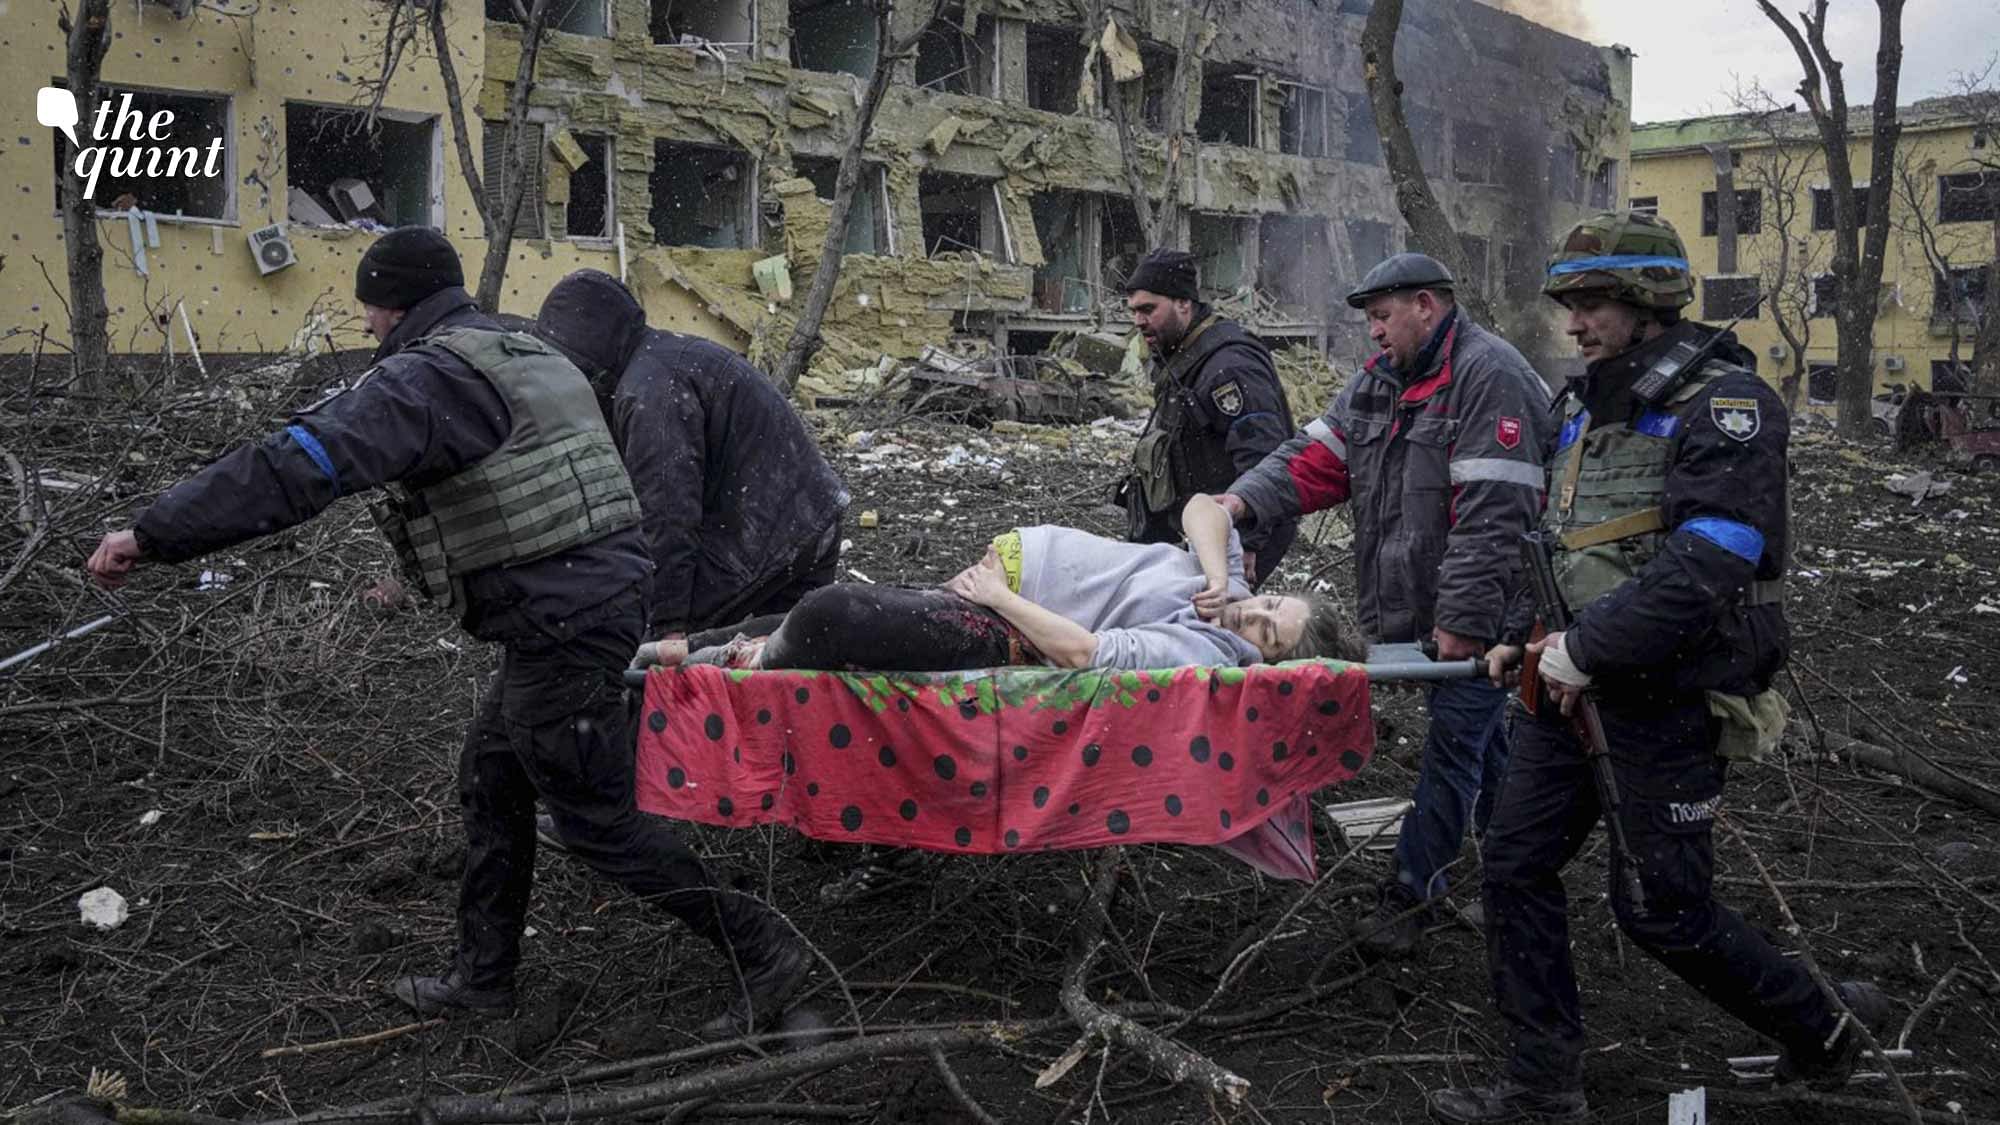 <div class="paragraphs"><p>An image of a pregnant woman being carried out in a stretcher in Mariupol sparked worldwide condemnation of Russian atrocities in Ukraine. Both the woman and her child did not survive.</p></div>